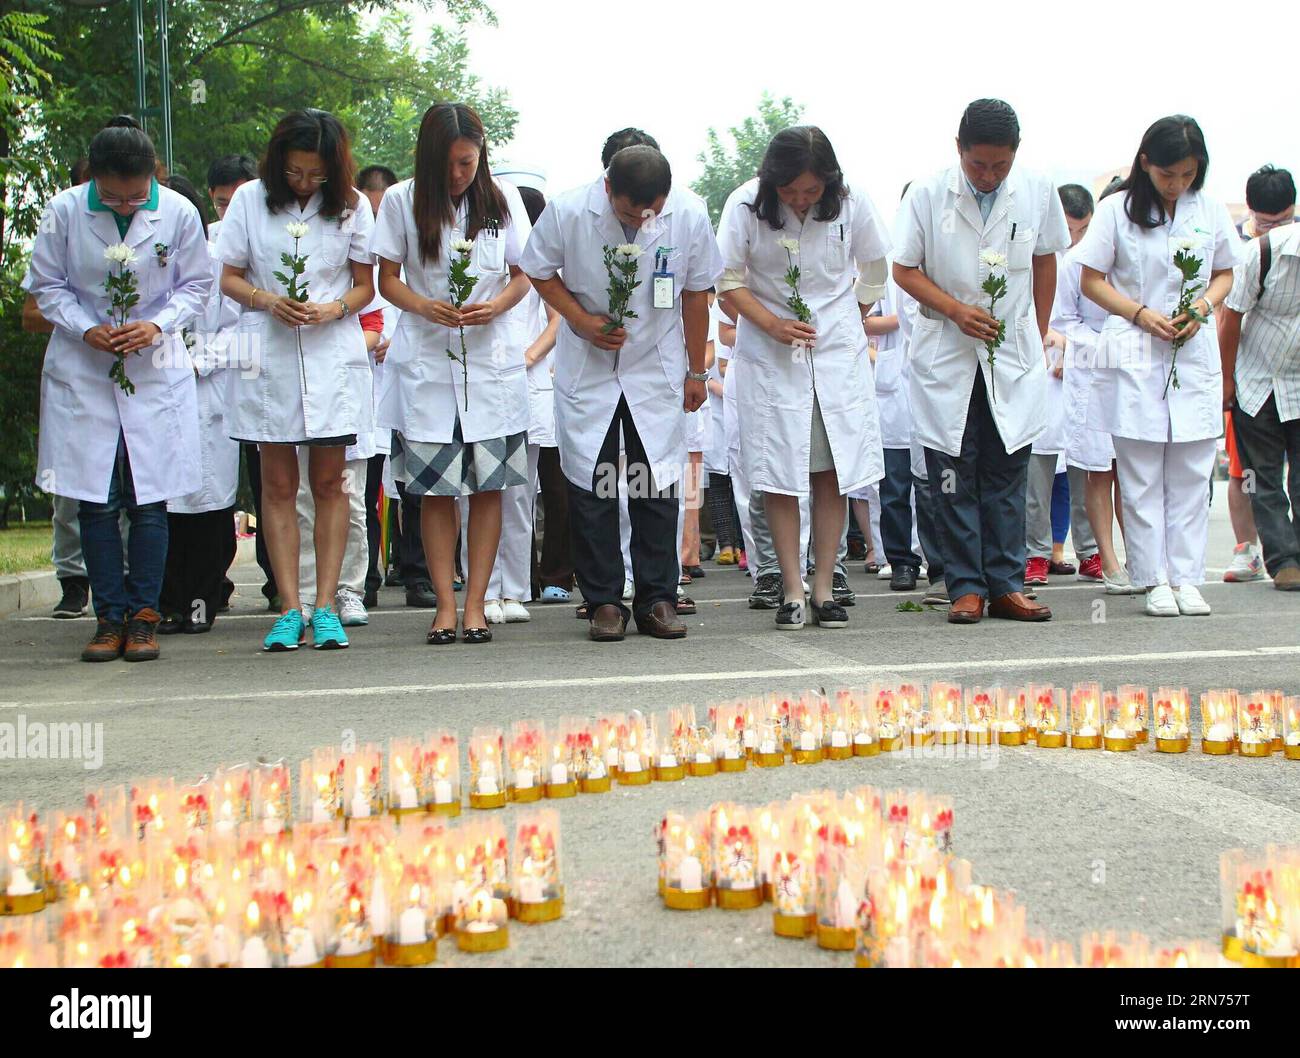 (150818) -- TIANJIN, Aug. 18, 2015 -- A mourning ceremony is held for the victims of the massive warehouse explosions at Taida Hospital near the explosion site in Tianjin, north China, Aug. 18, 2015. The death toll from last week s massive blasts in Tianjin rose to 114. ) (wyo) CHINA-TIANJIN-EXPLOSION-MOURNING (CN) ChenxYichen PUBLICATIONxNOTxINxCHN   150818 Tianjin Aug 18 2015 a Mourning Ceremony IS Hero for The Victims of The Massive Warehouse Explosions AT Taida Hospital Near The Explosion Site in Tianjin North China Aug 18 2015 The Death toll from Load Week S Massive BLAST in Tianjin Rose Stock Photo